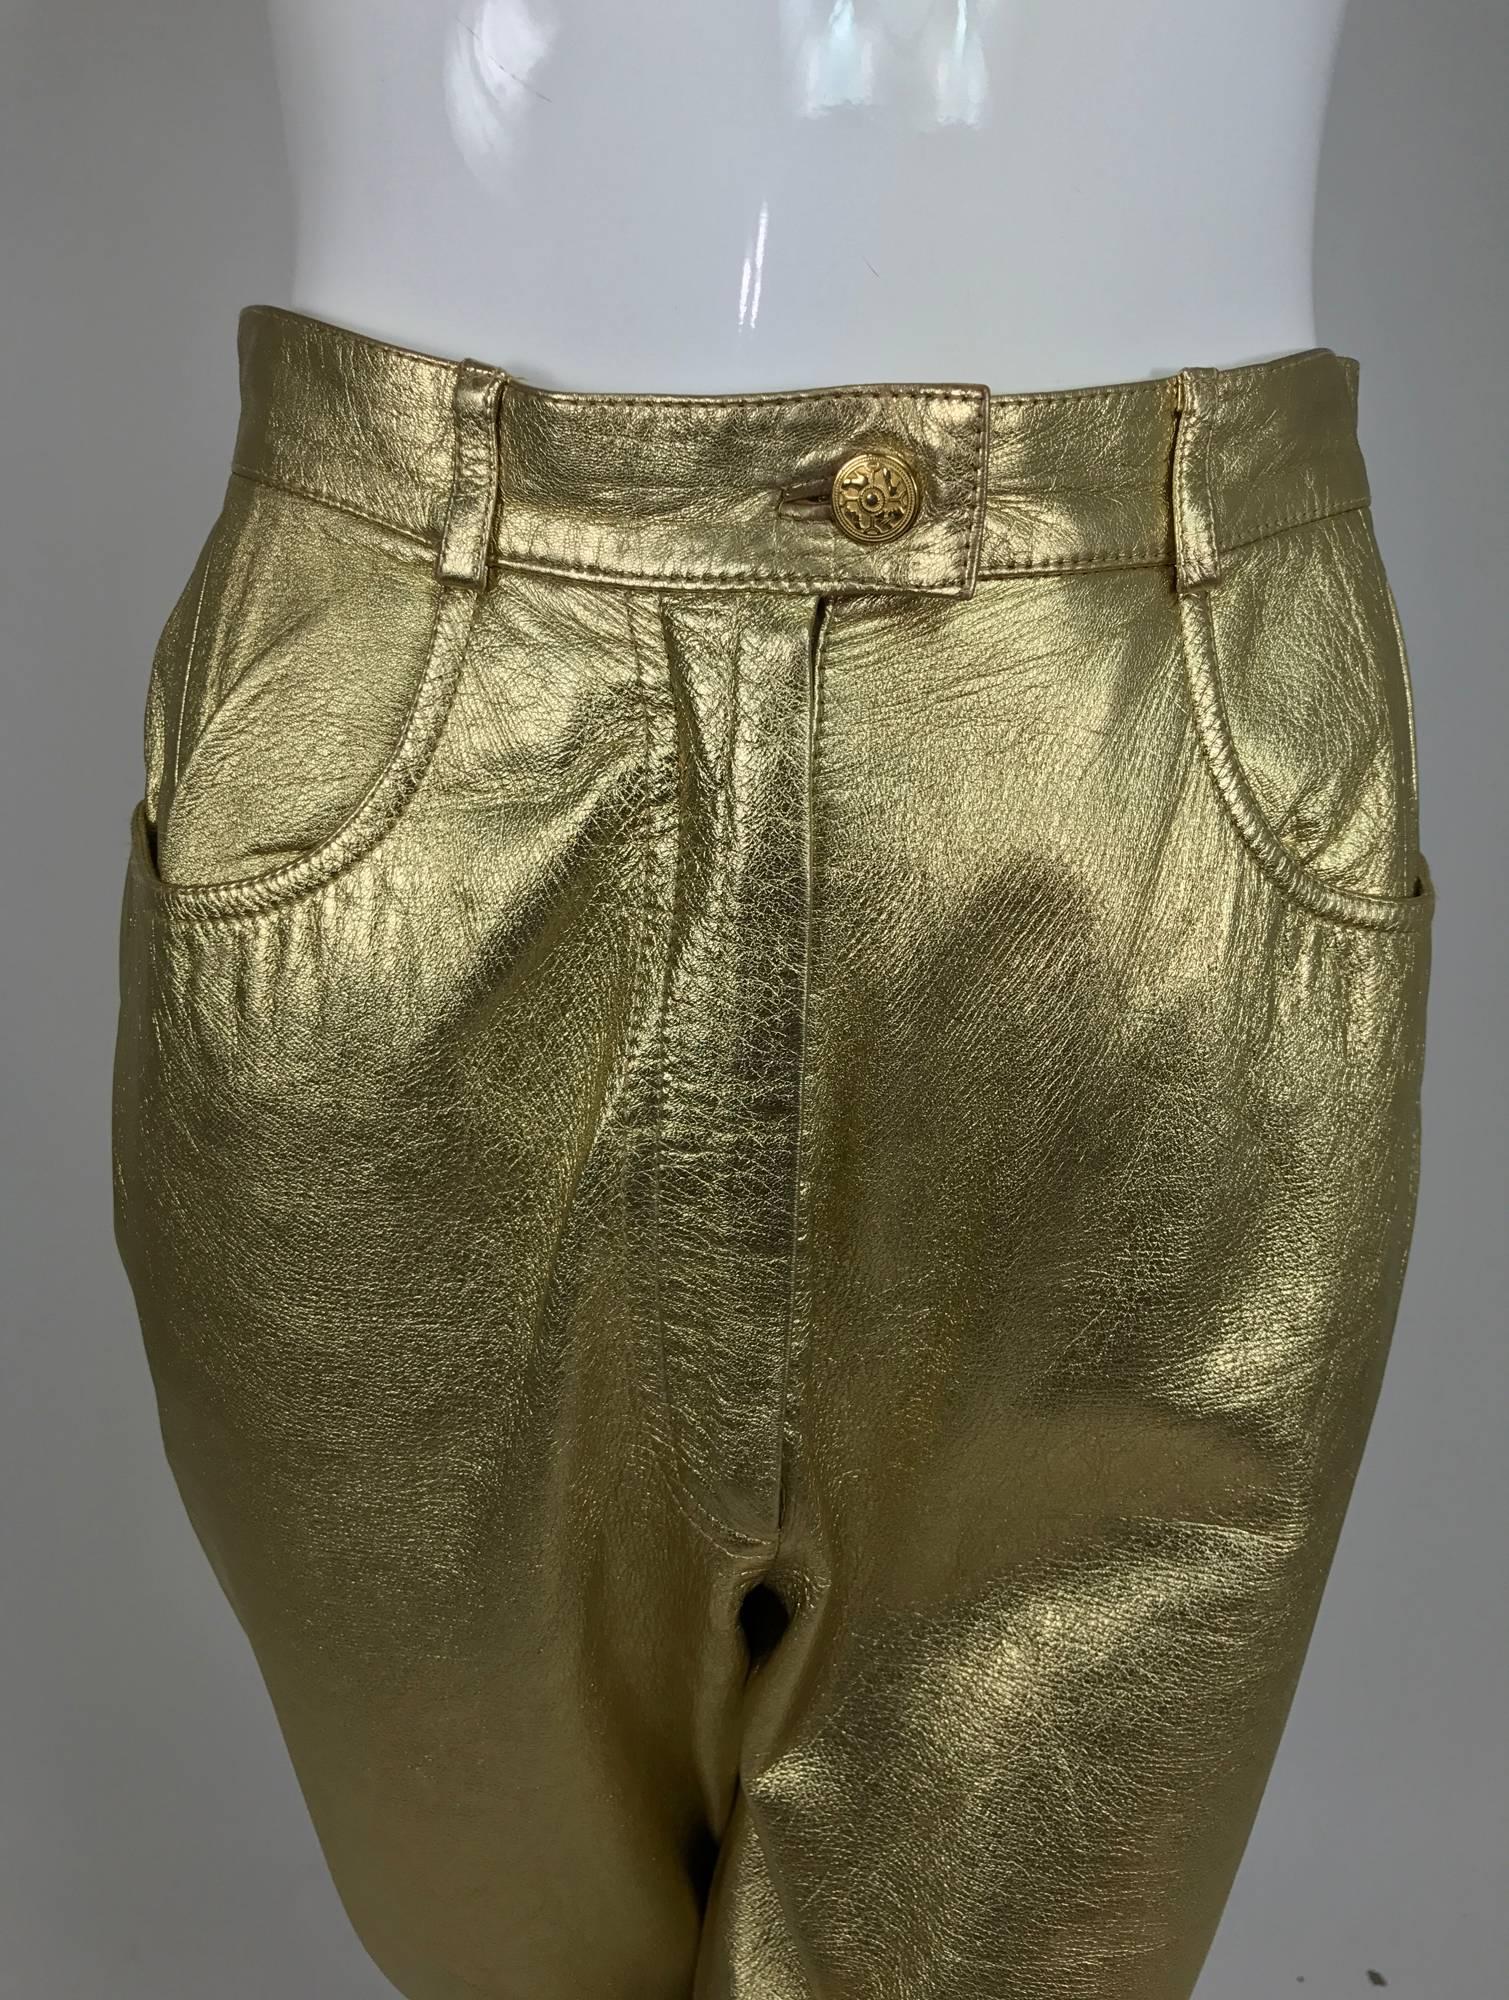 Ferragamo soft gold leather jeans style trousers from the 1980s...Fly front with button waist and scoop front pockets, yoke back there are no back pockets...Bright gold leather, these trousers sit at the natural waist and are fitted through the hip,